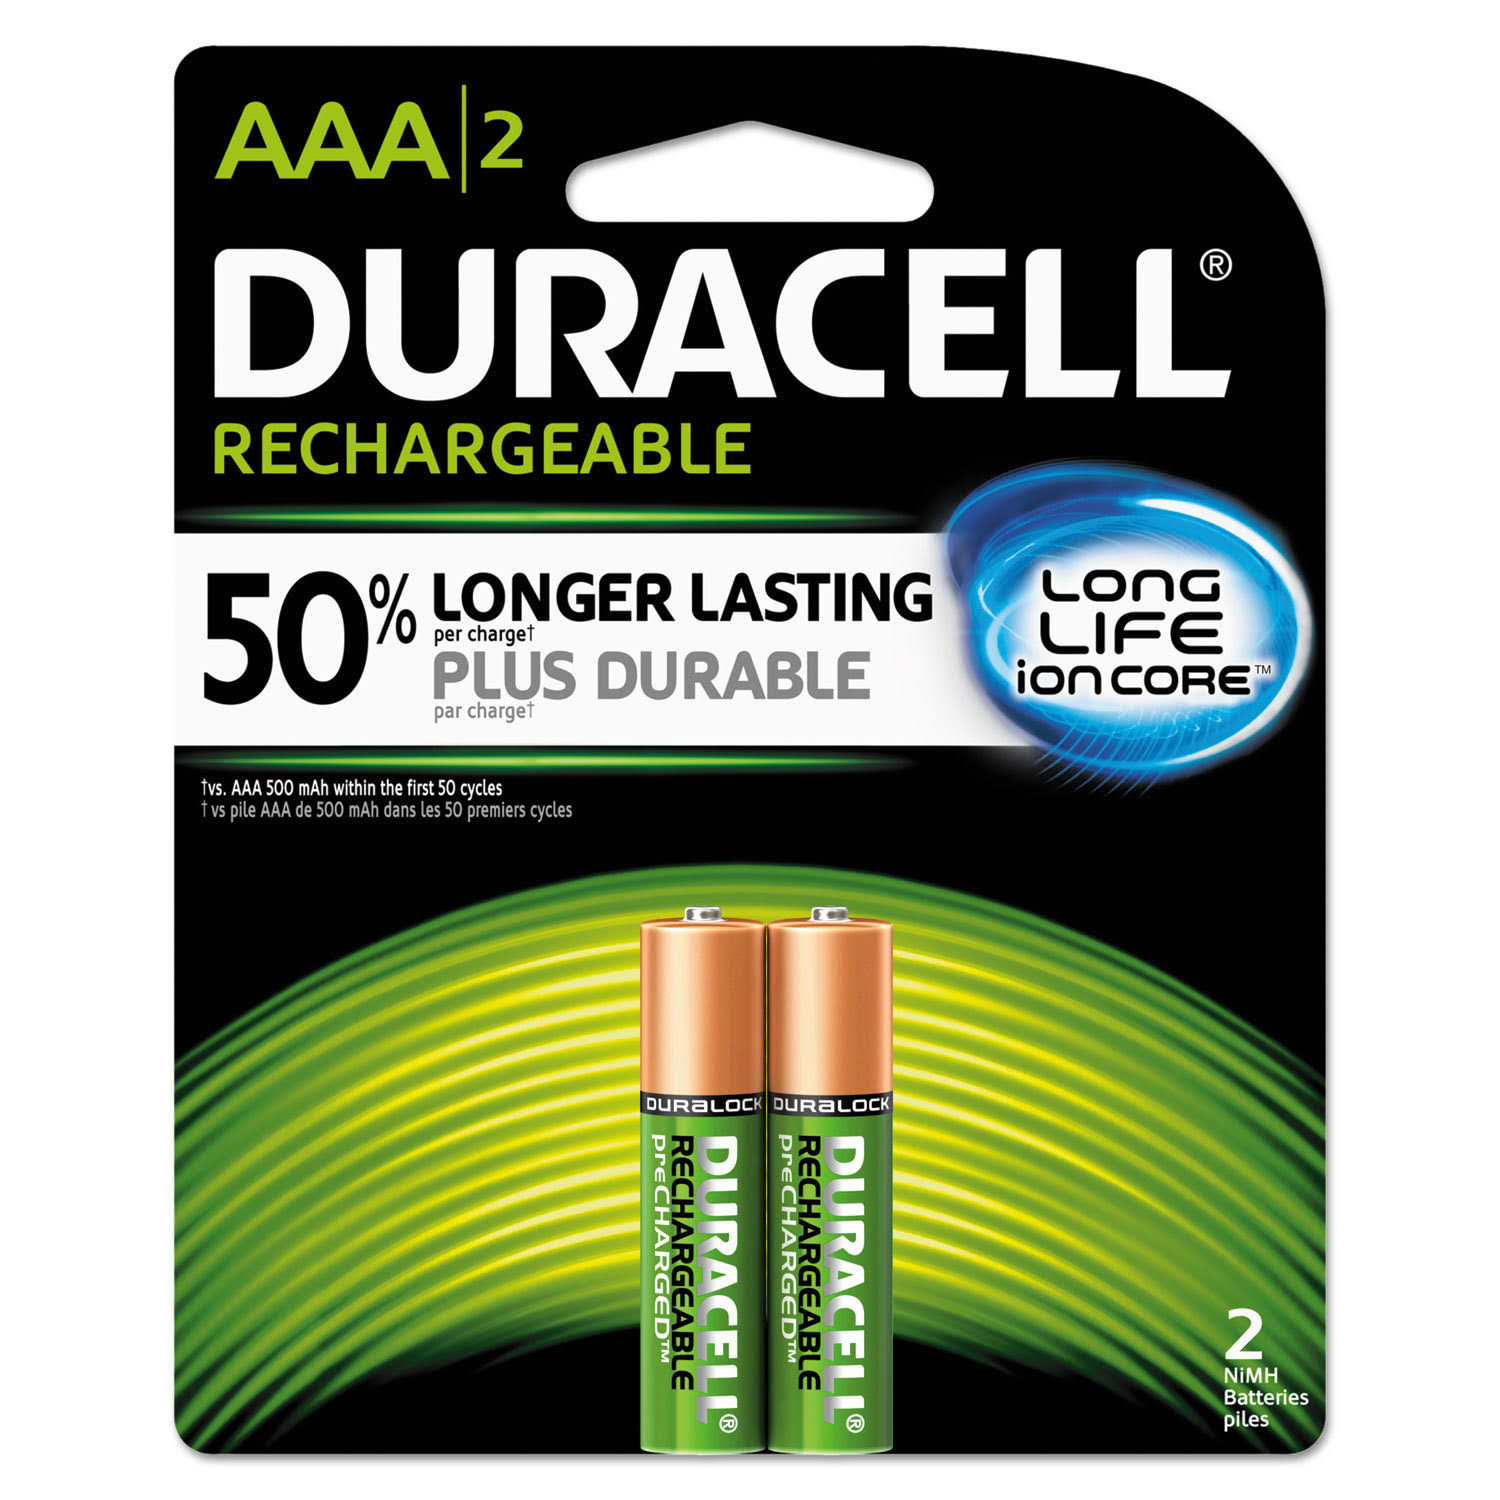 Duracell Rechargeable AAA Batteries - 2pcs